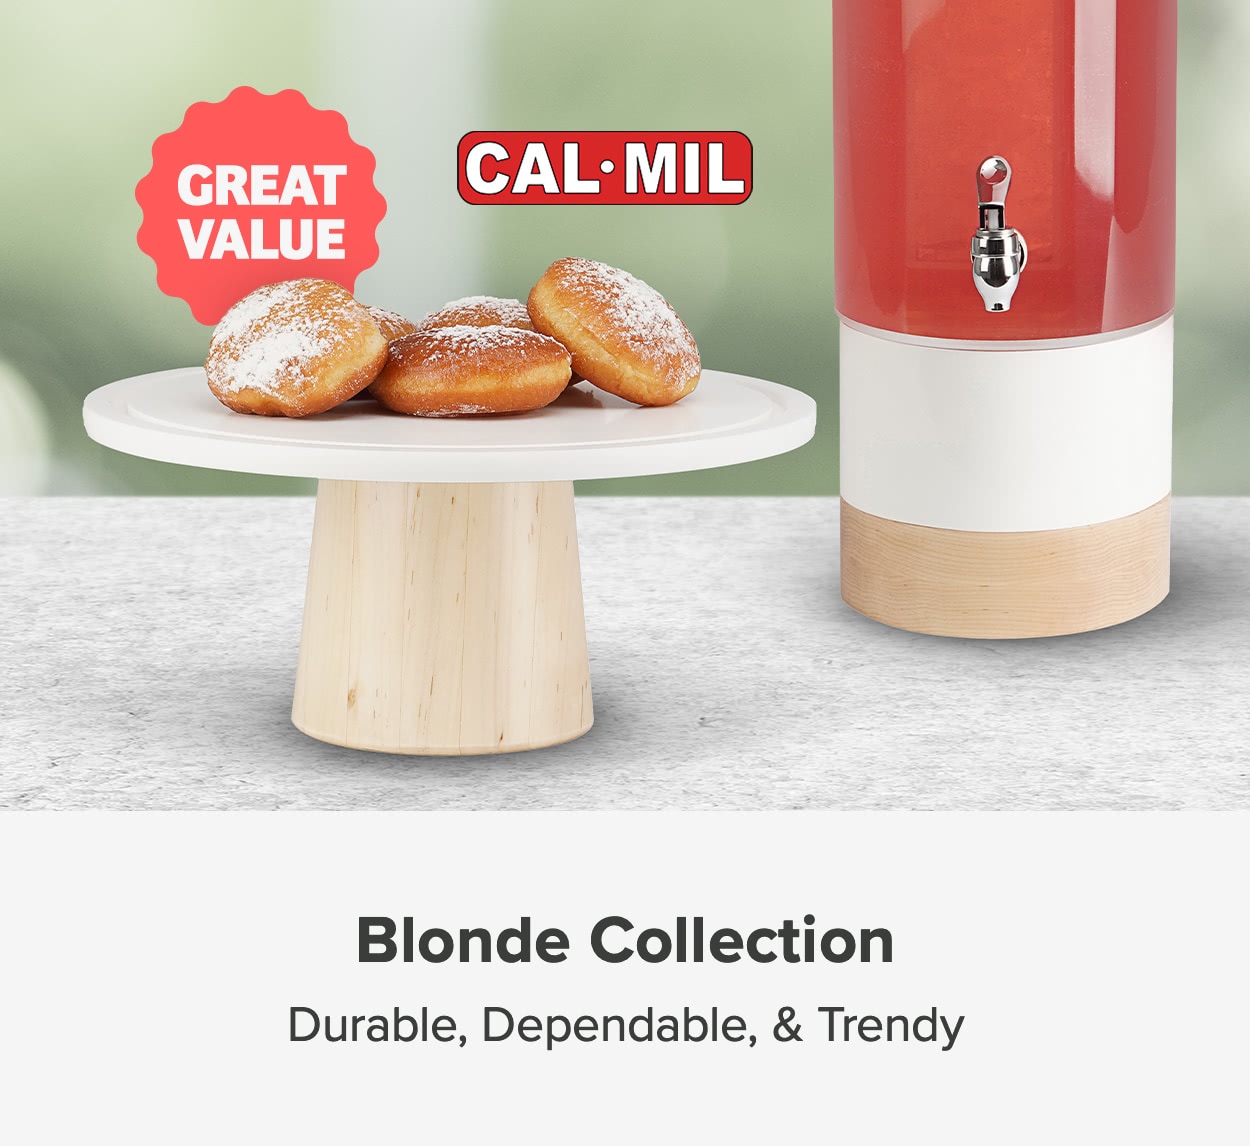 Shop the Cal-Mil Blonde Collection